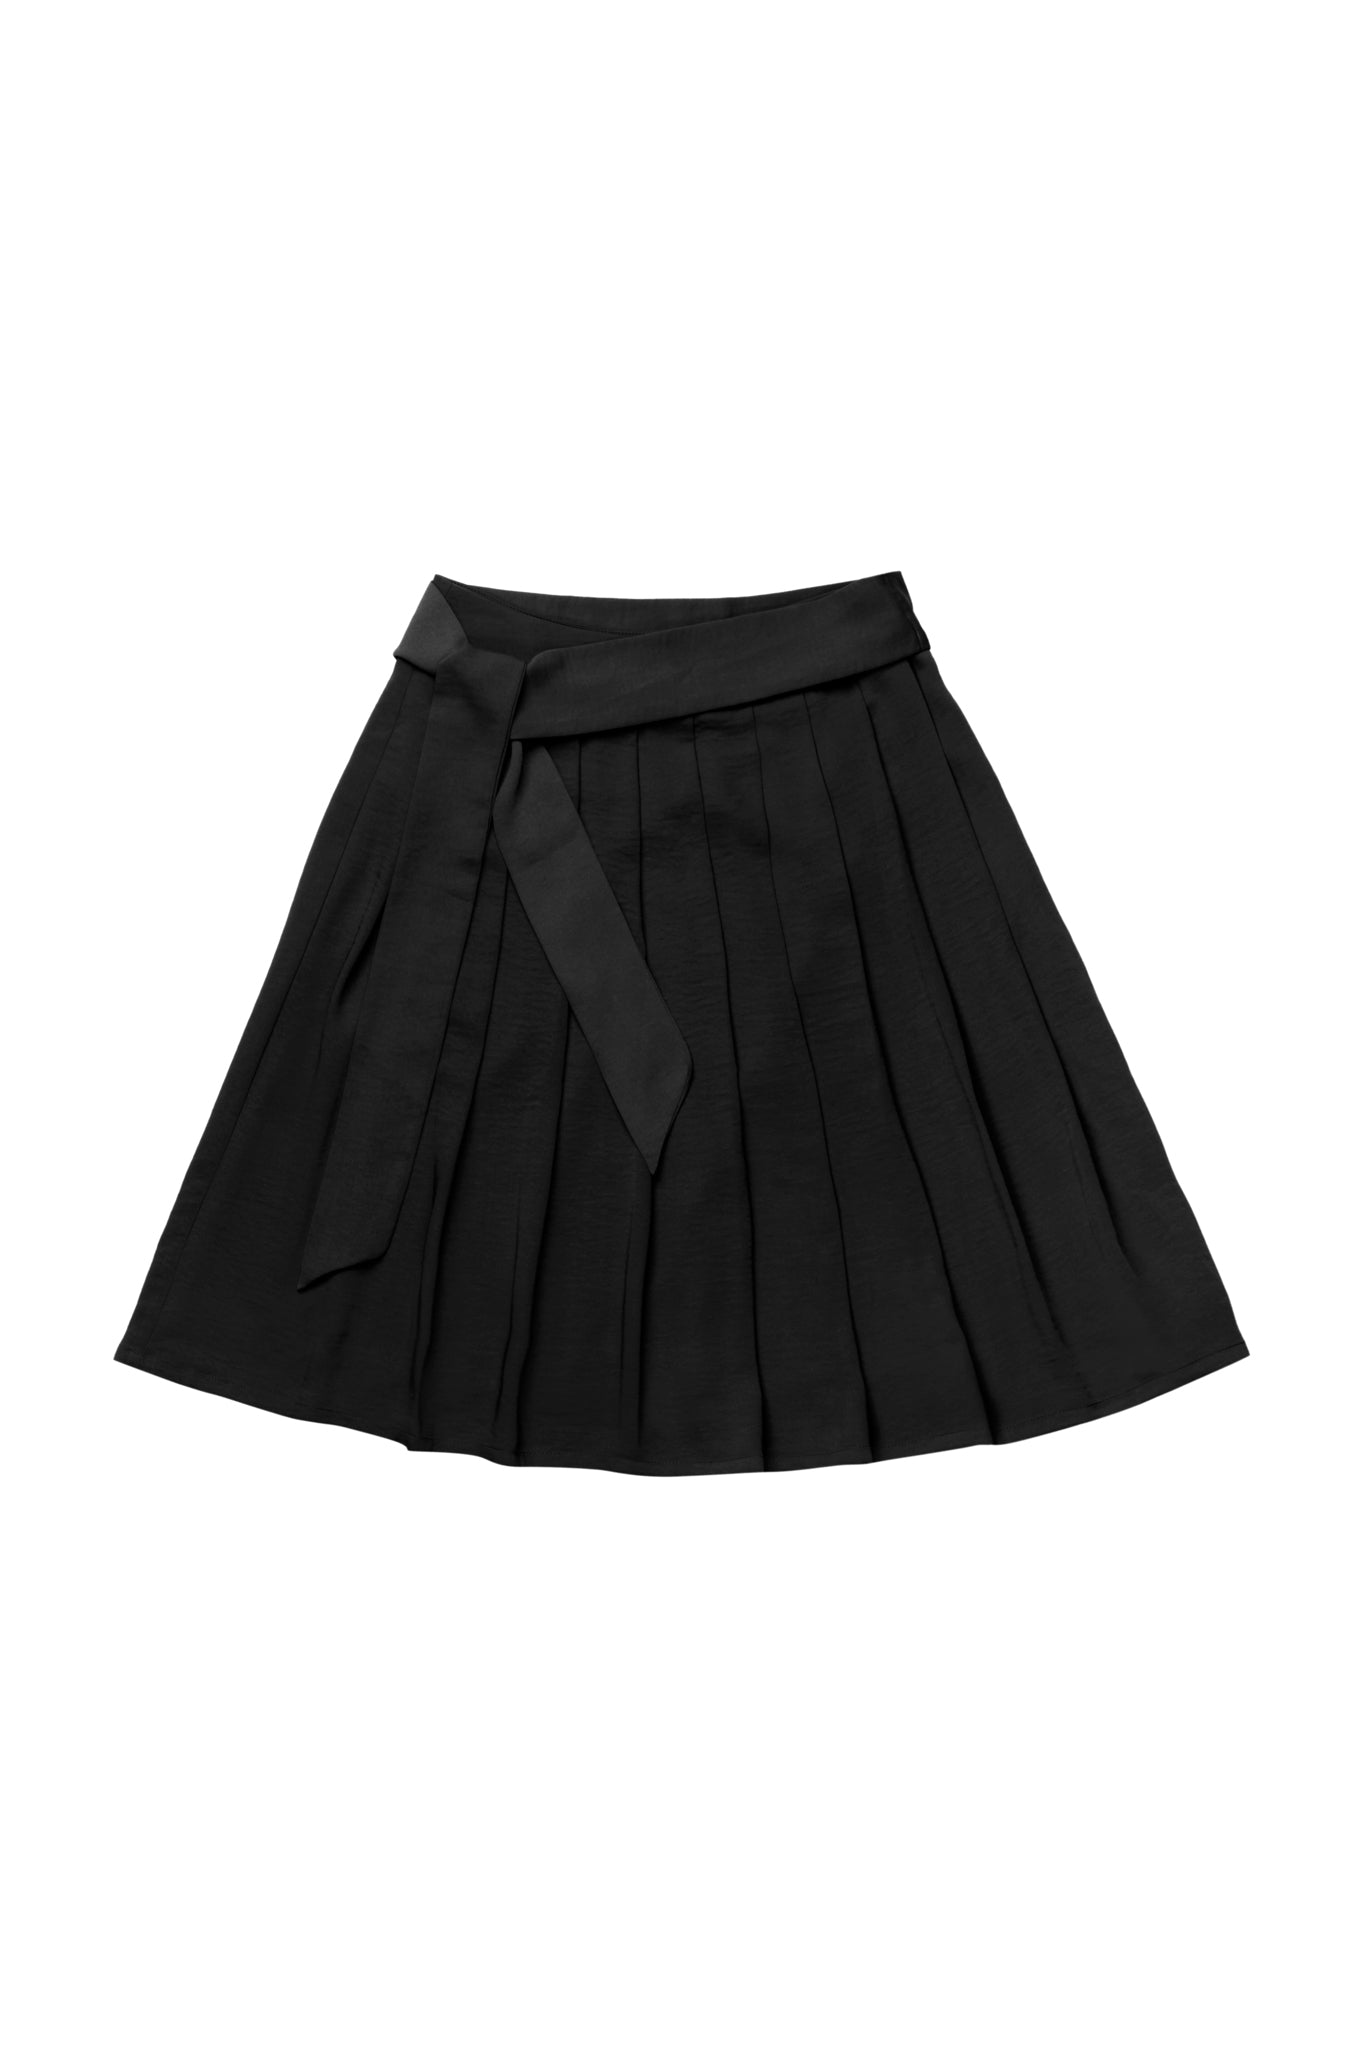 Black Belted Pleated Skirt #4025FW1 FINAL SALE